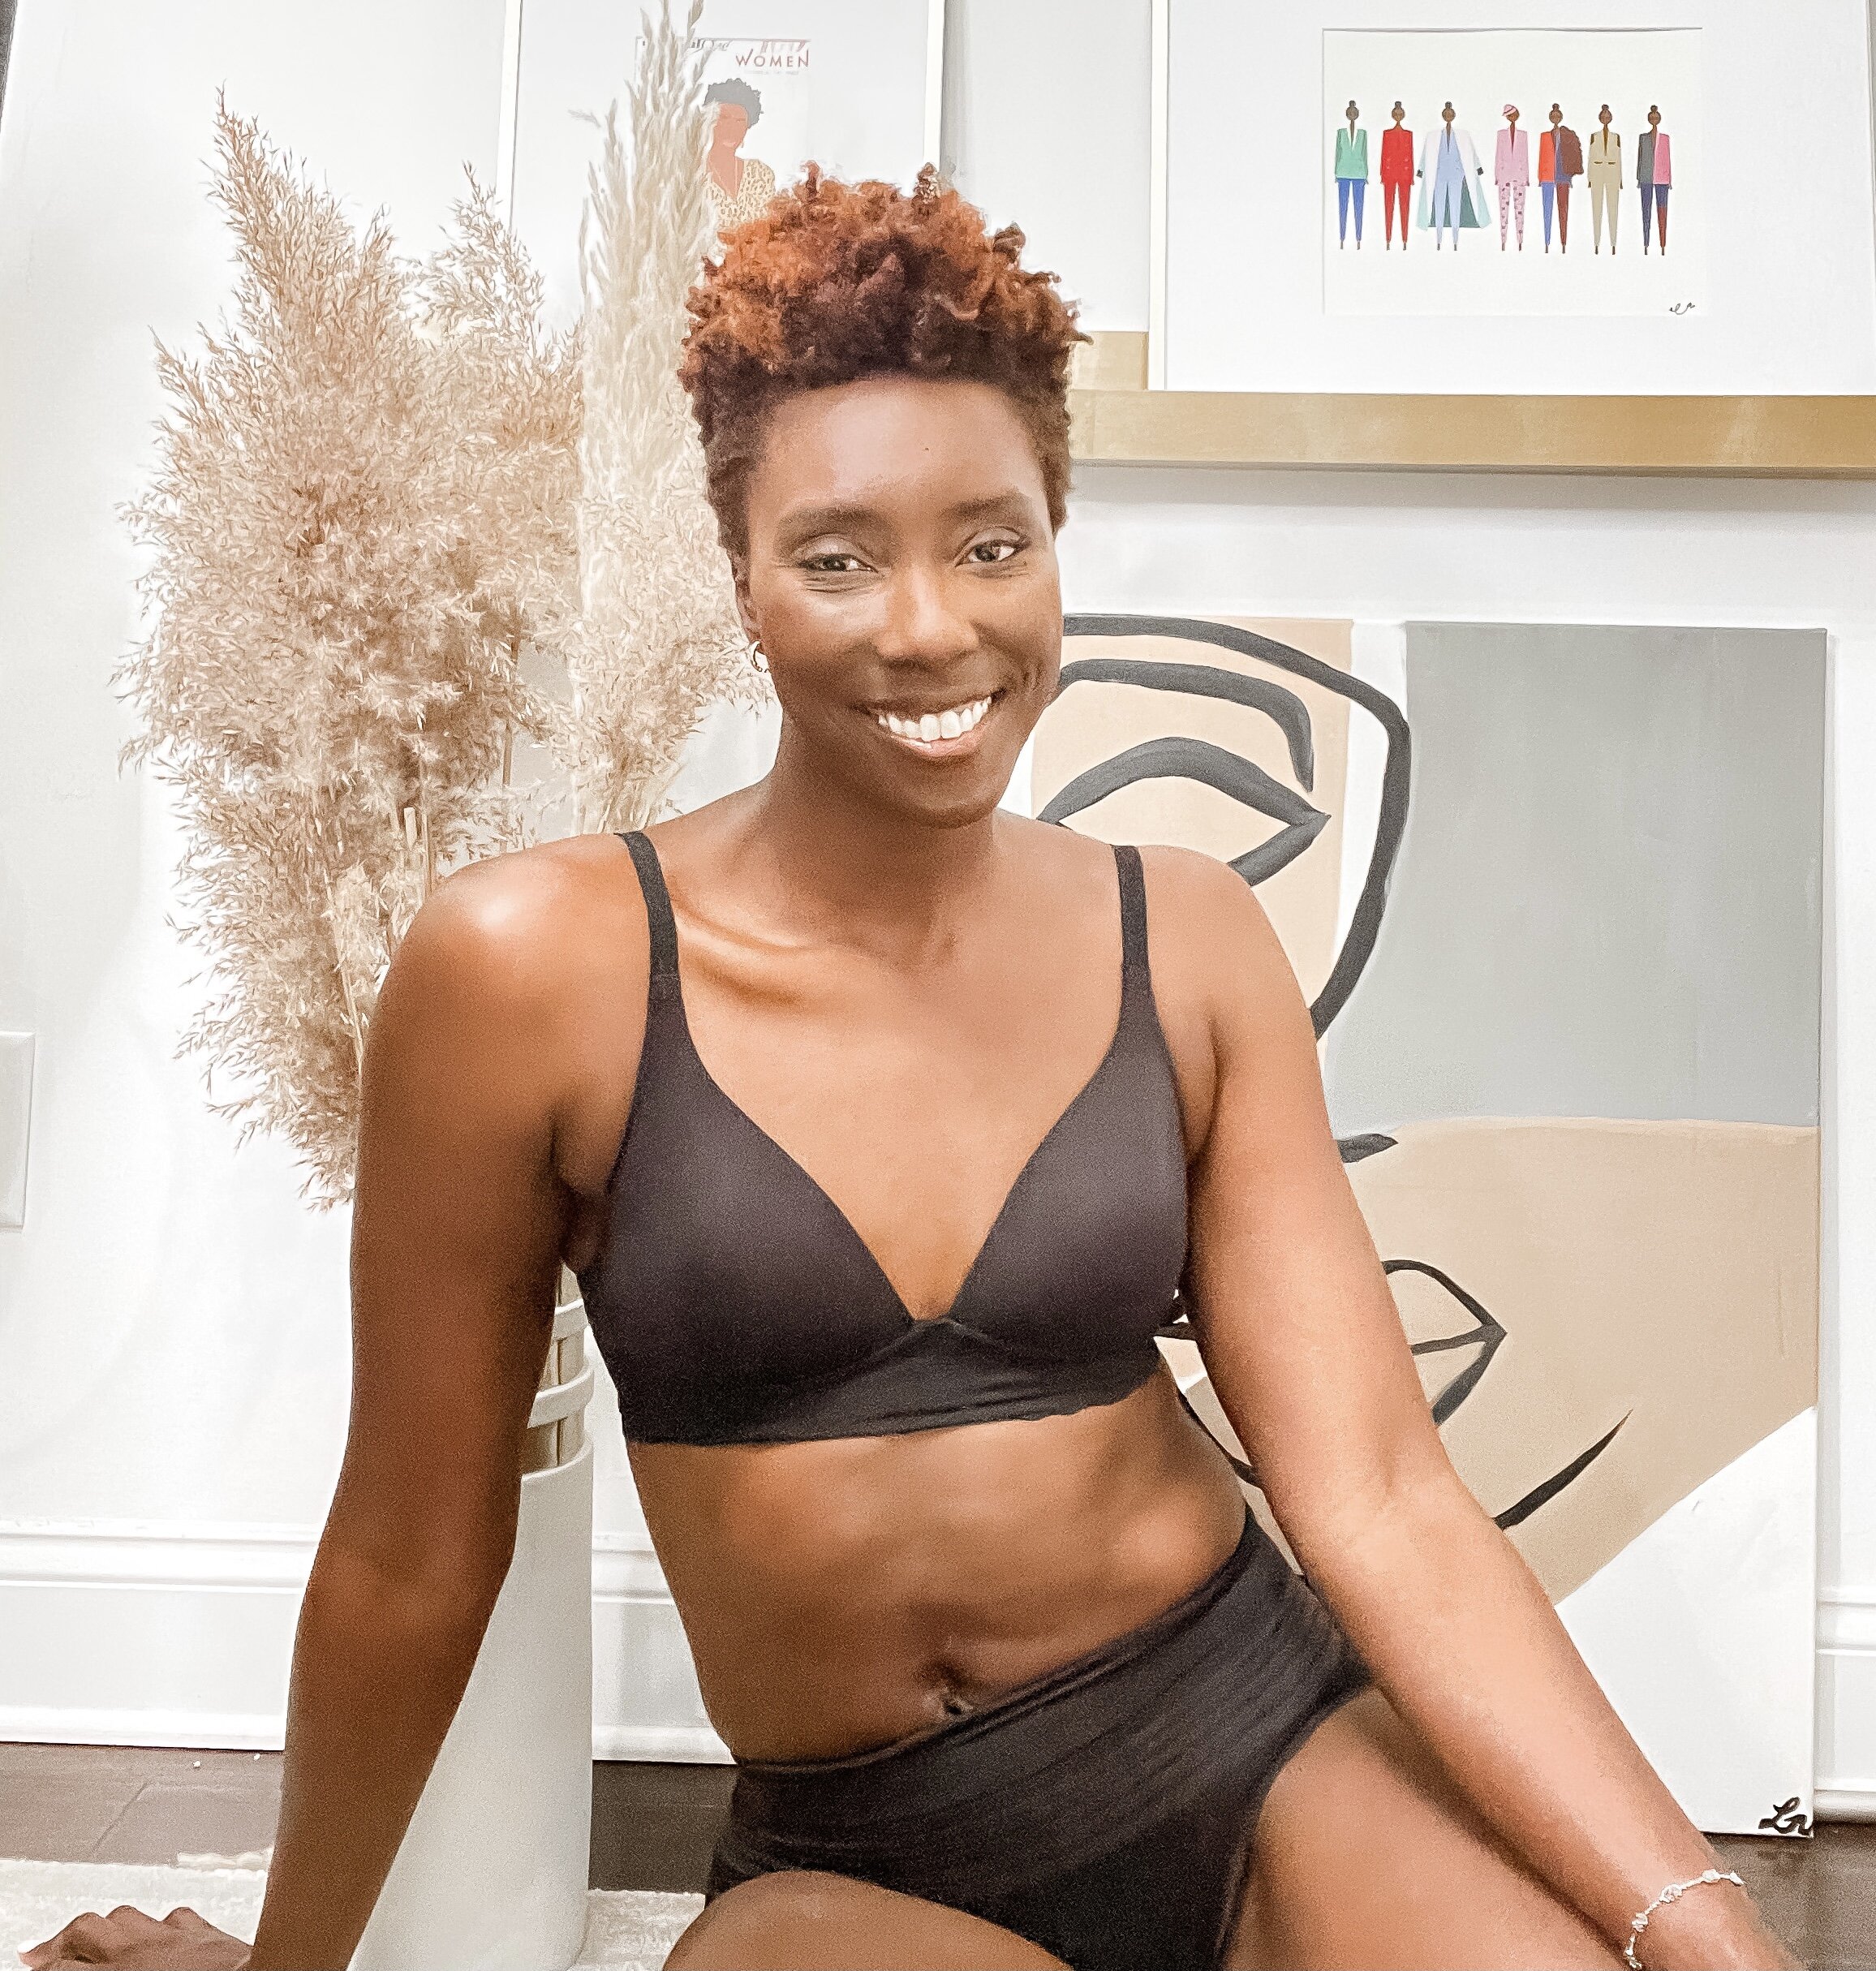 The perfect, comfortable bras we all need from Warner Bras